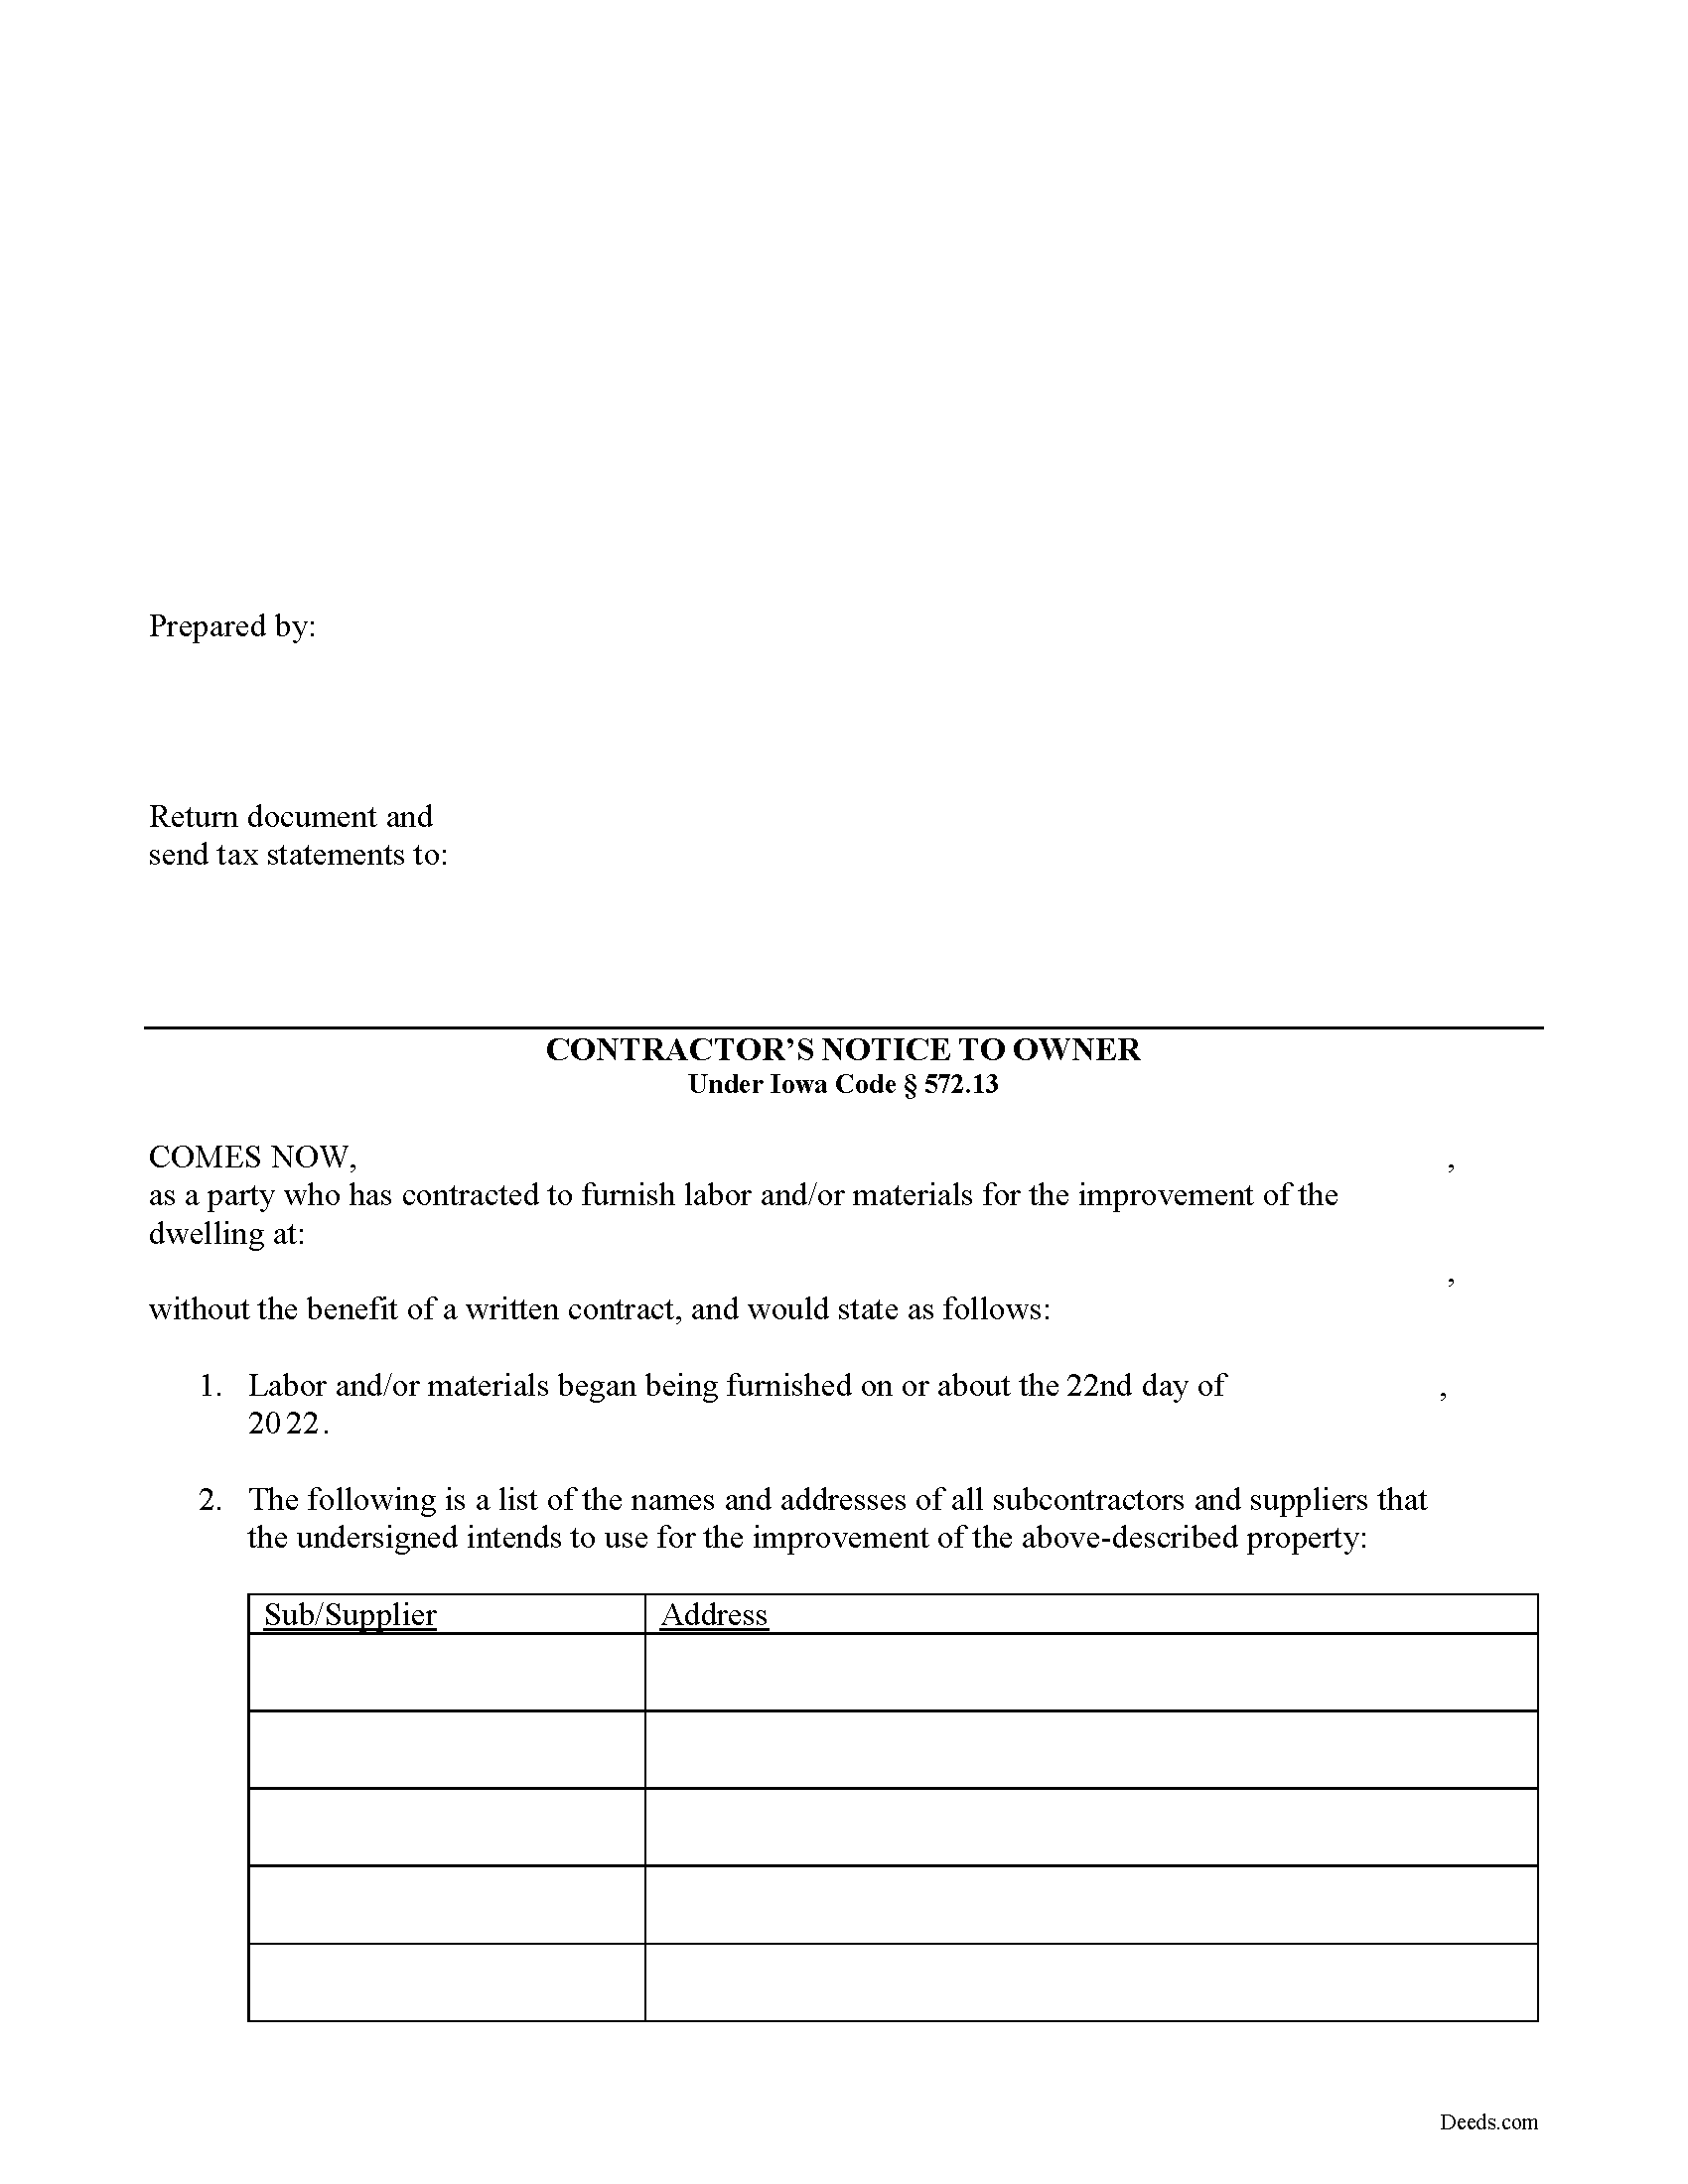 Contractor Notice to Owner Form